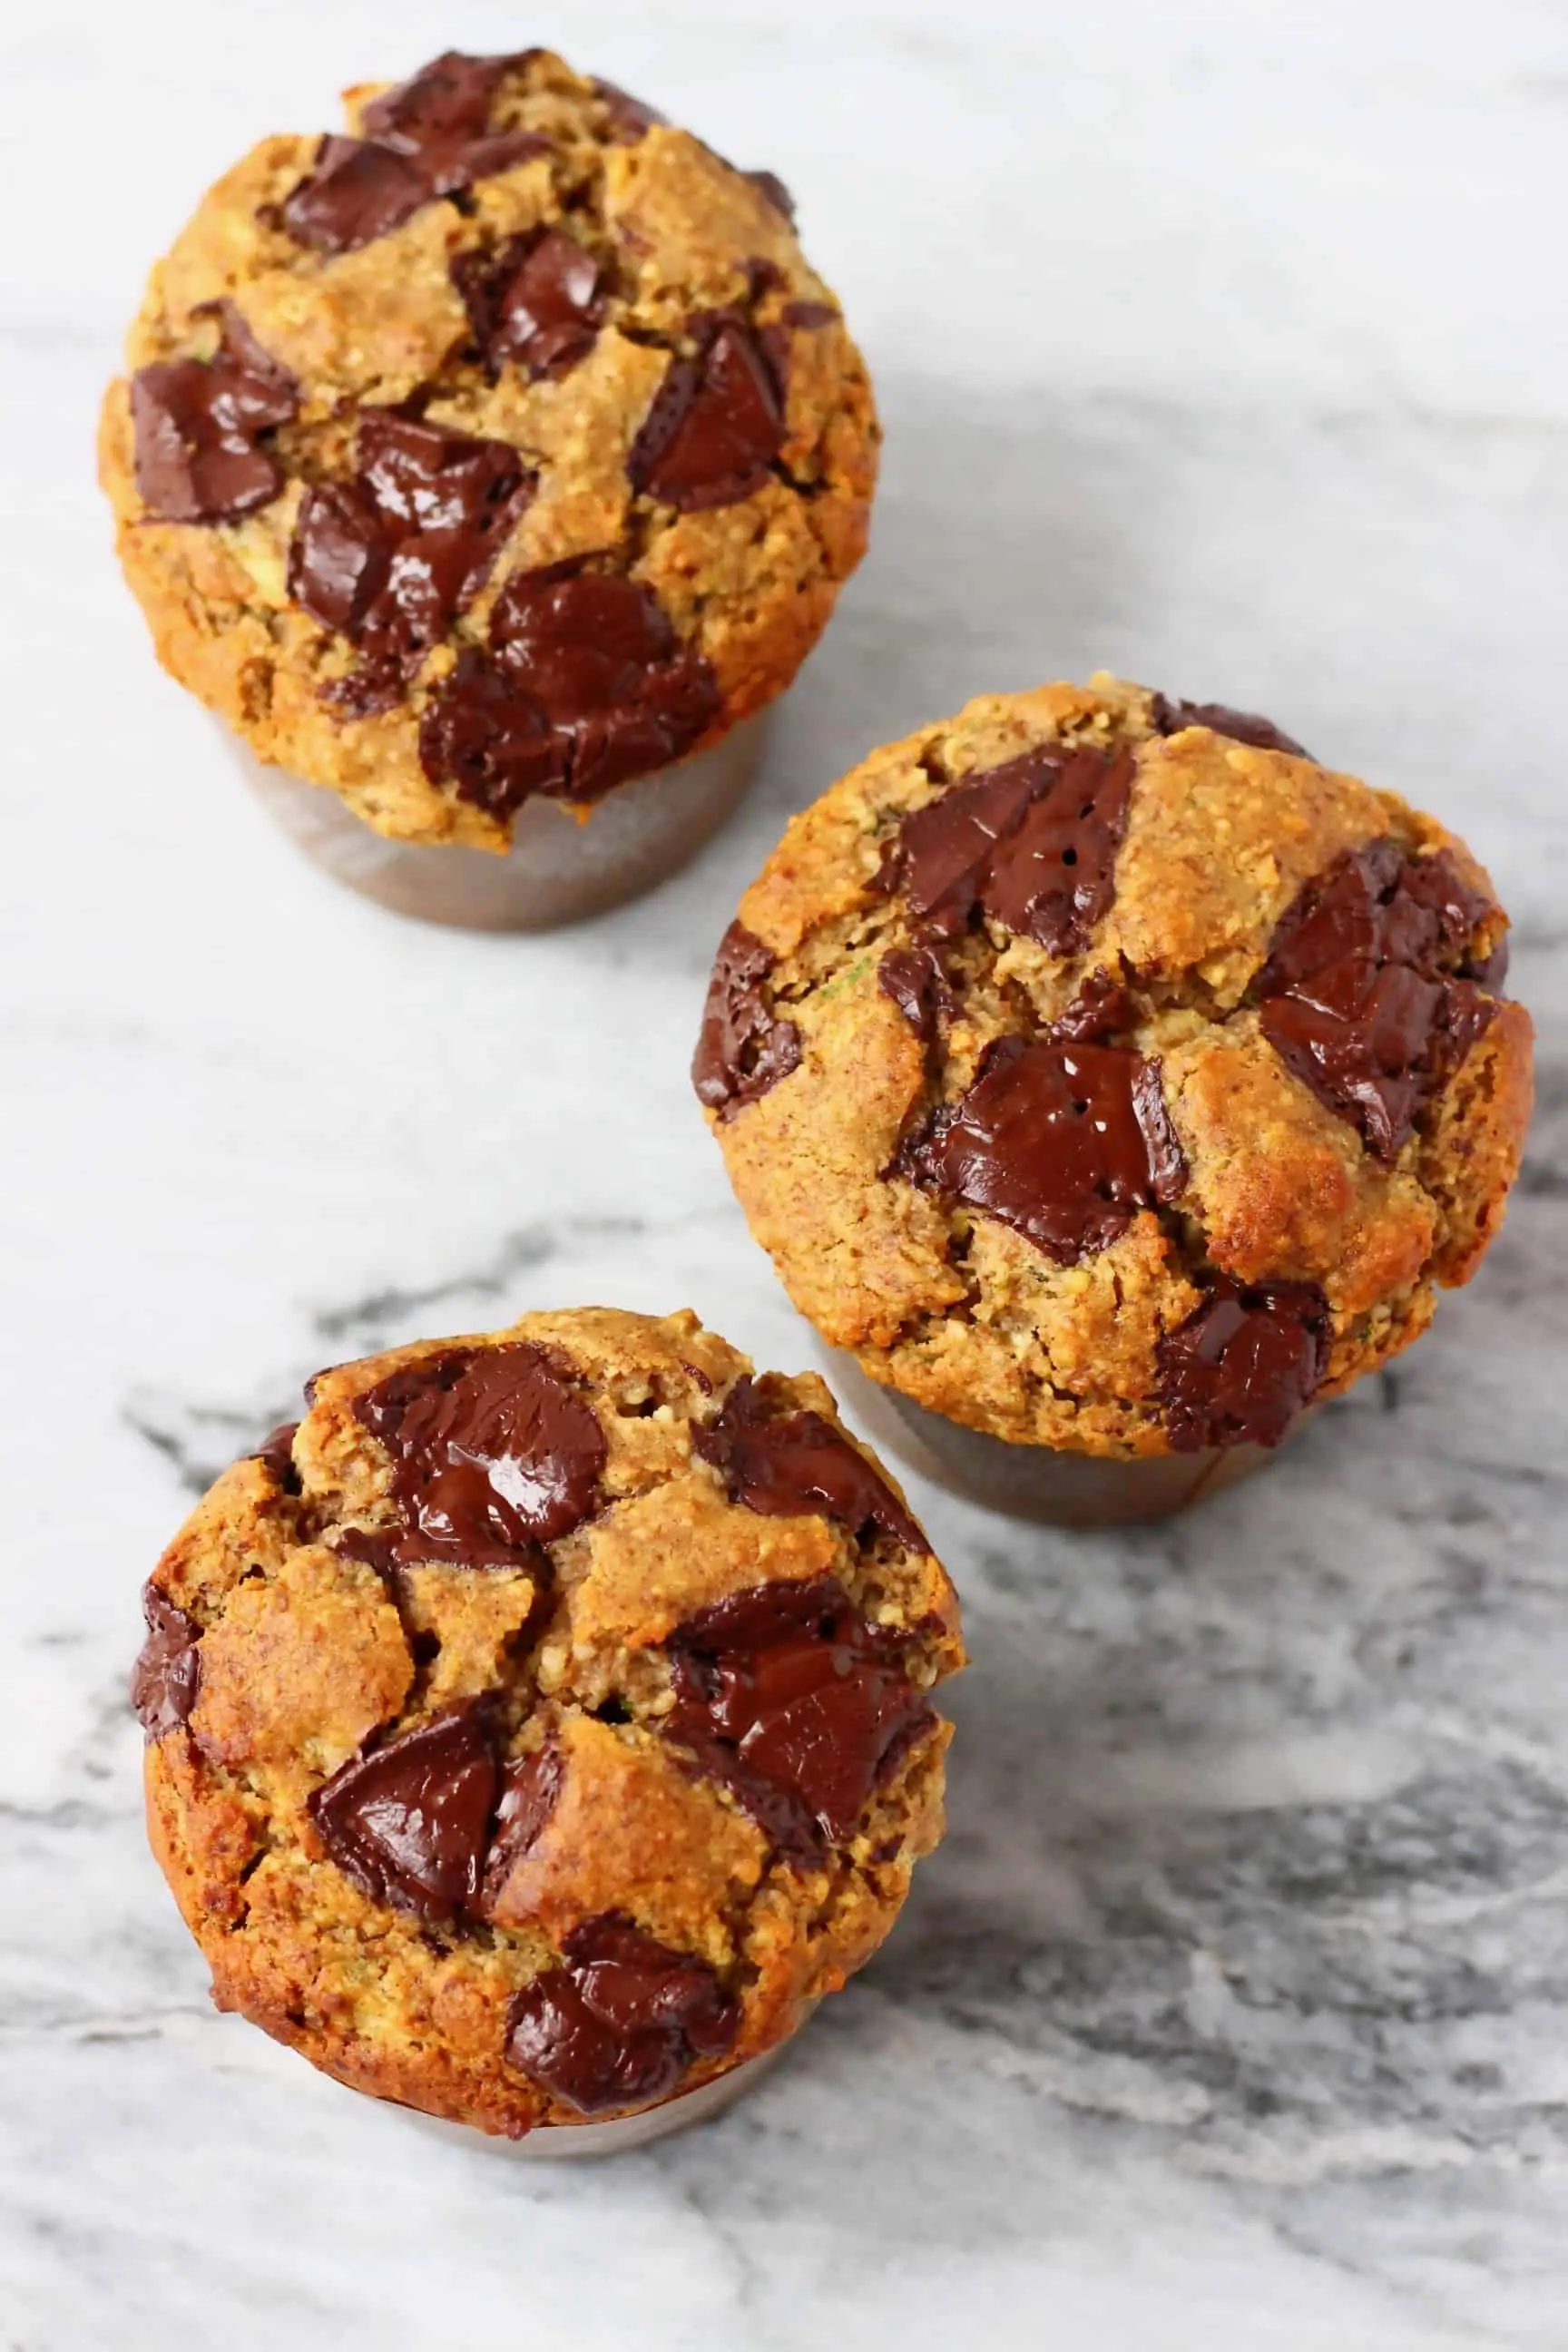 Three zucchini muffins with chocolate chips against a marble background